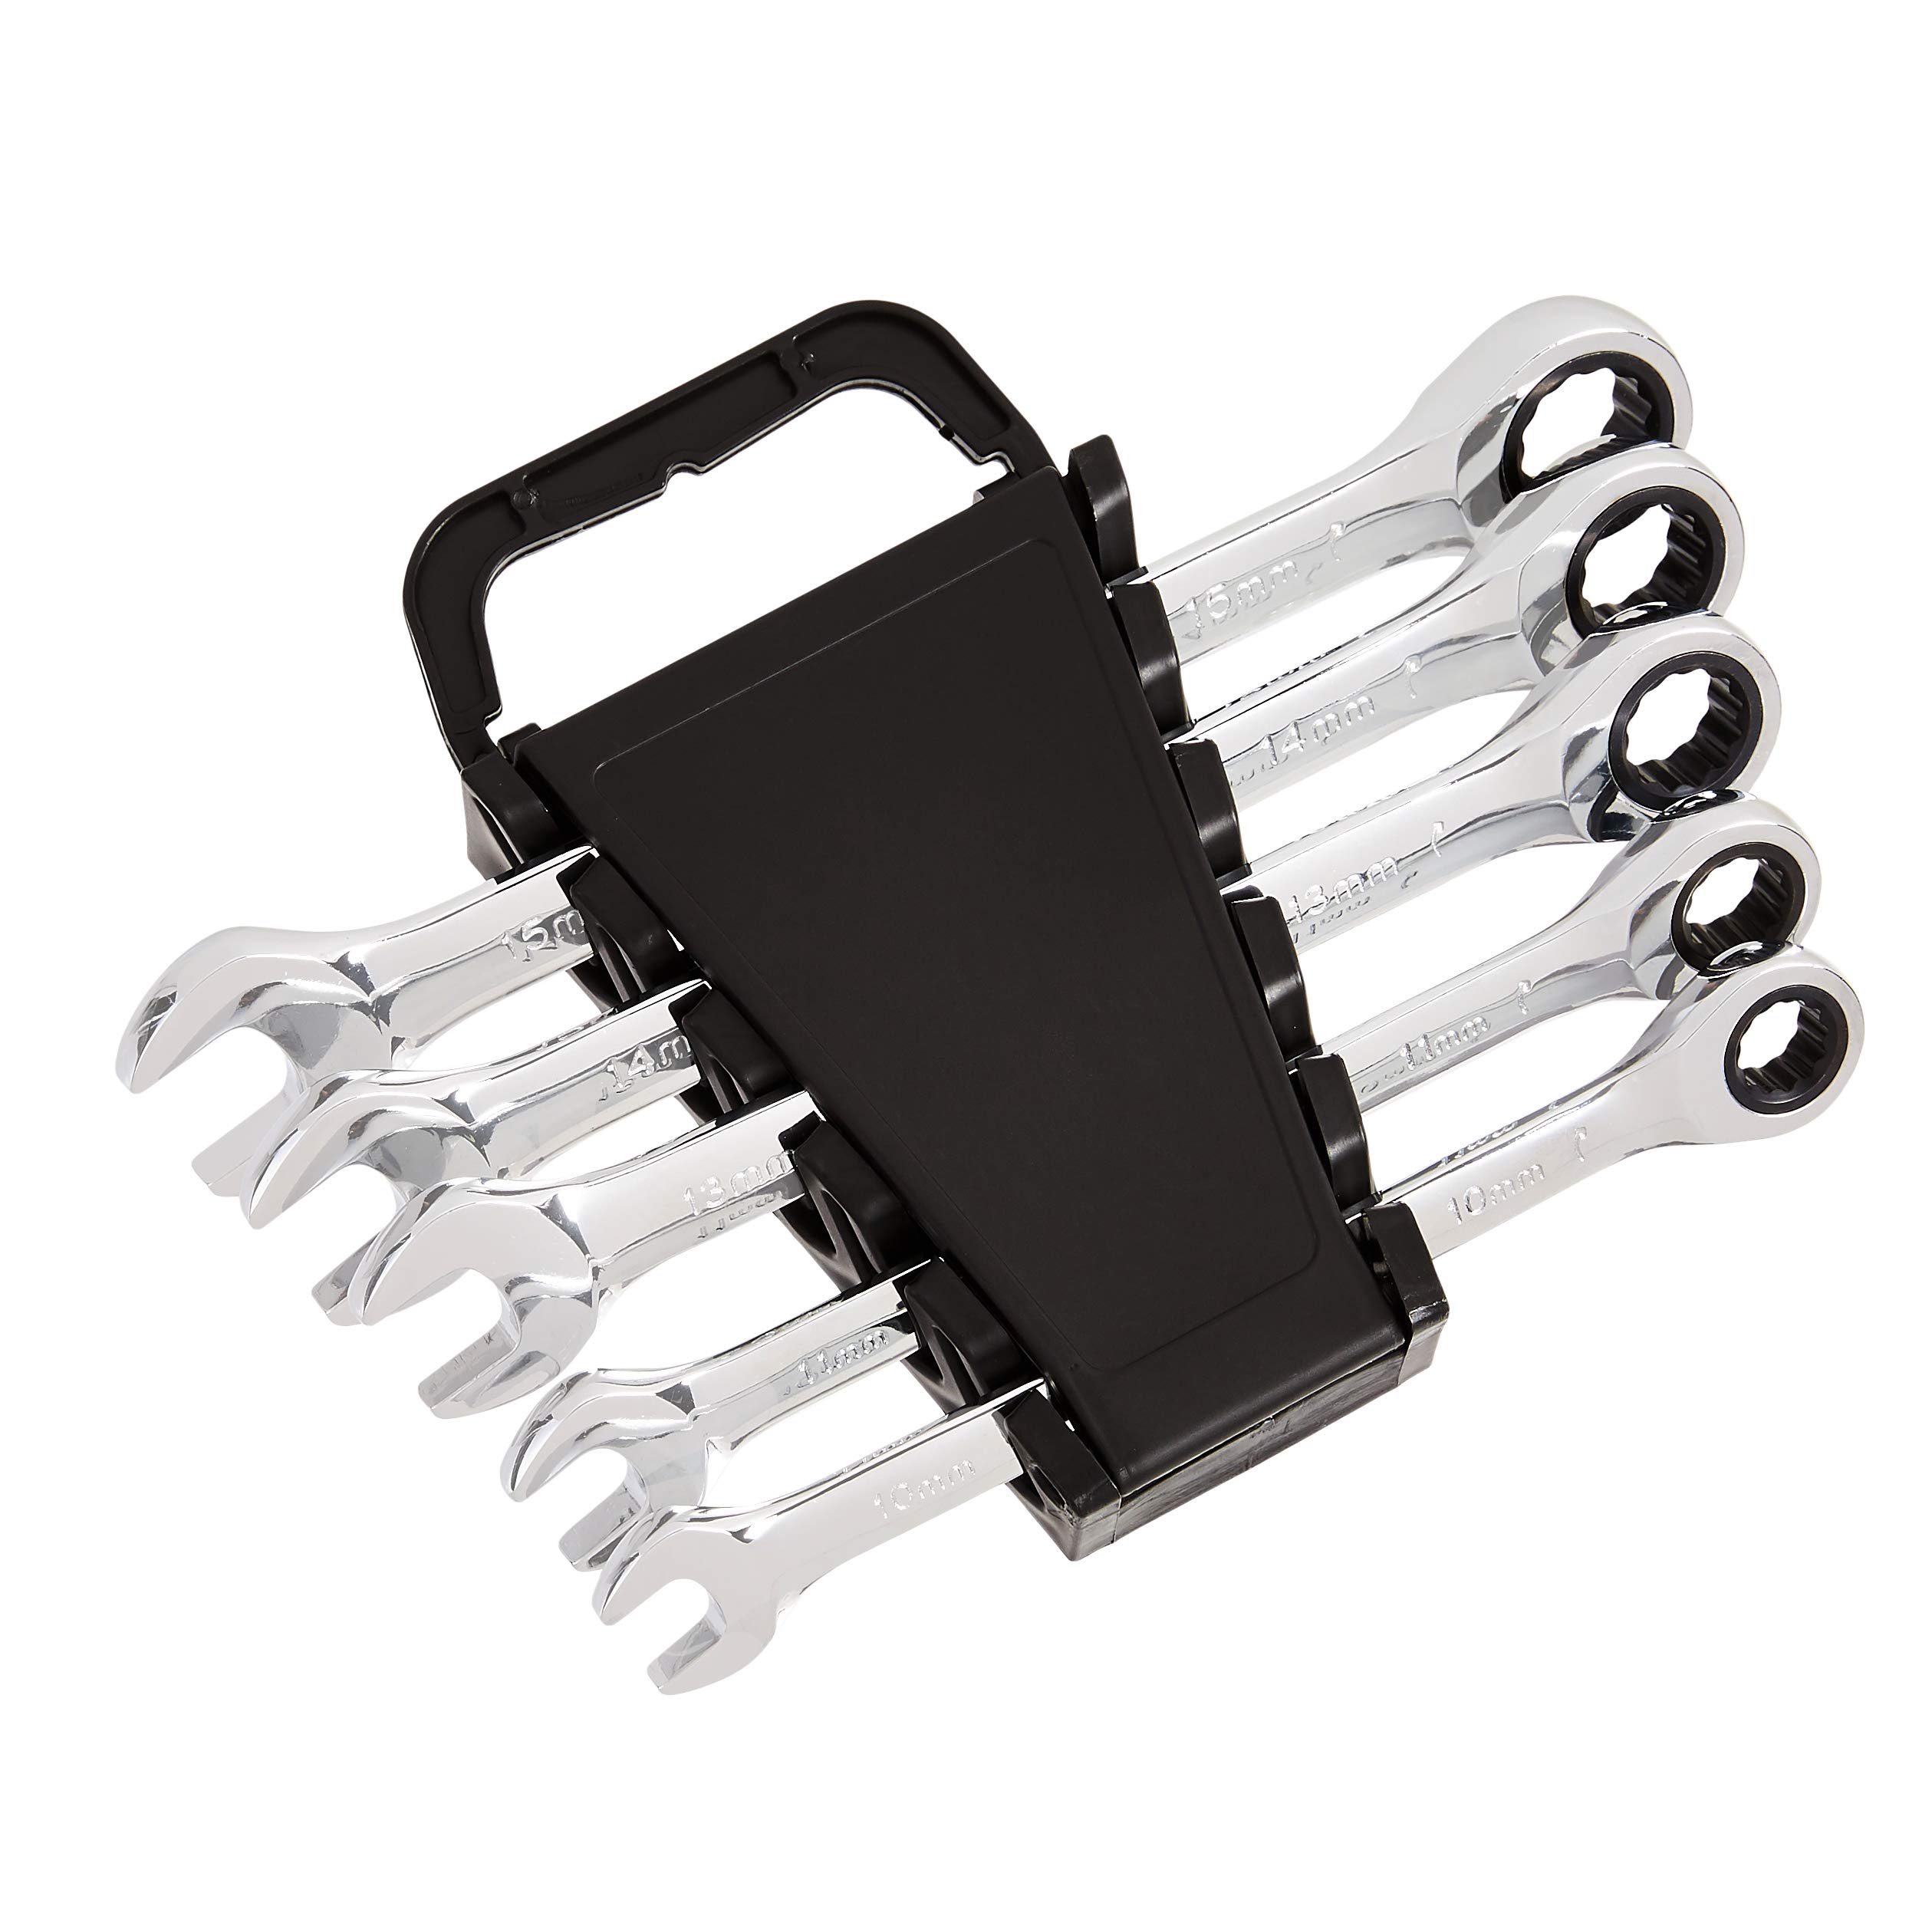 5-Piece Amazon Basics Ratcheting Wrench Set (Metric, Black/Silver) $11.90 + Free Shipping w/ Prime or on orders $35+